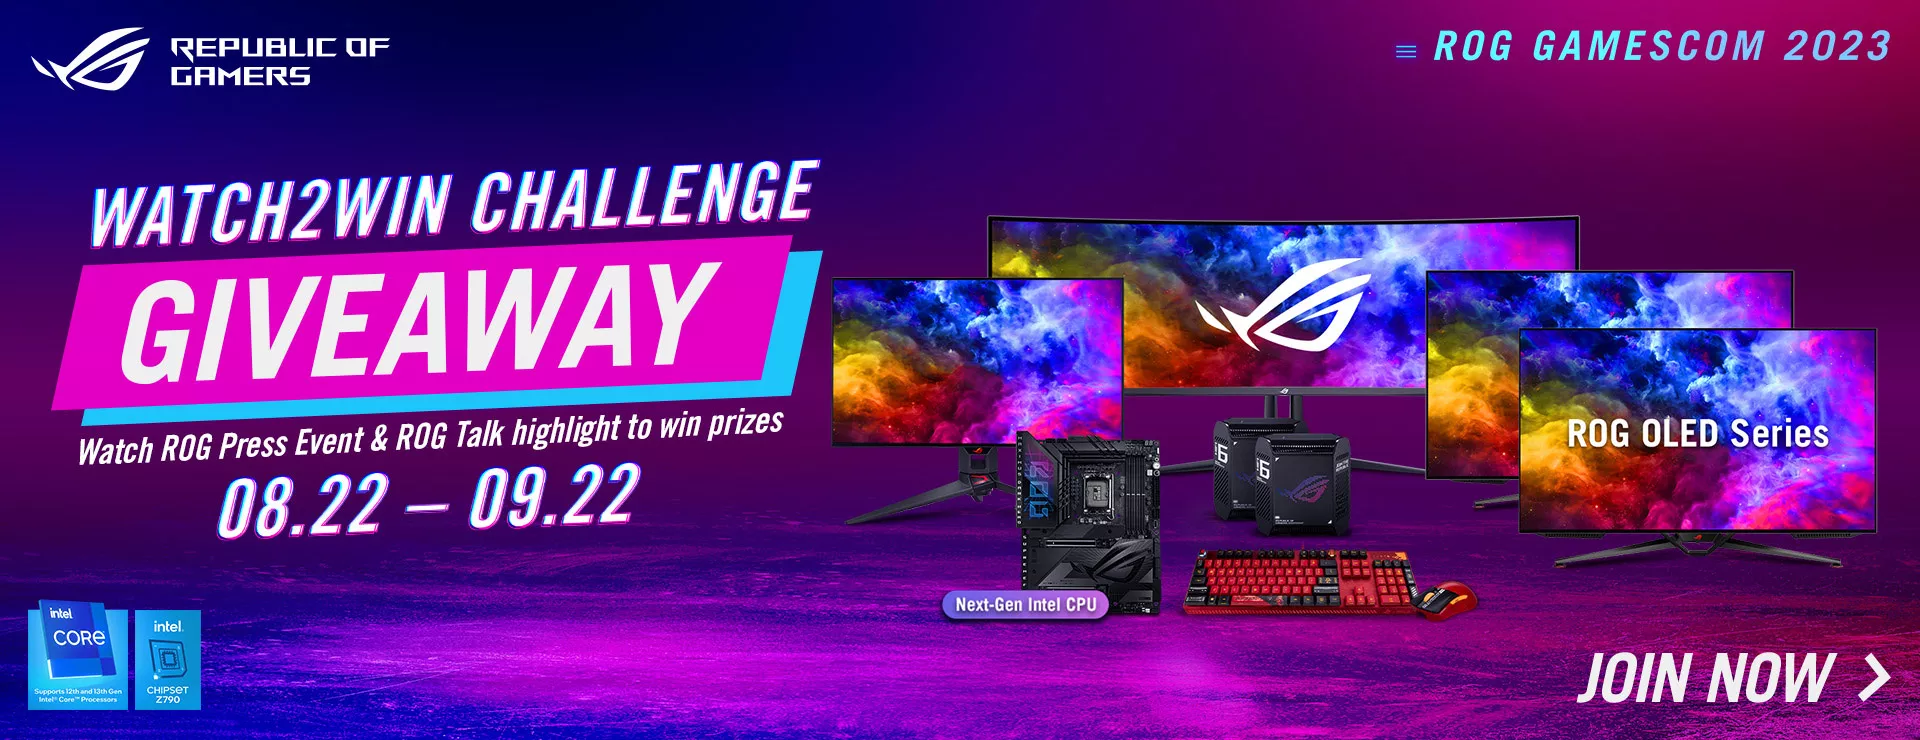 ROG will show off the latest cutting-edge hardware, peripherals, and other innovations that take gaming to another level